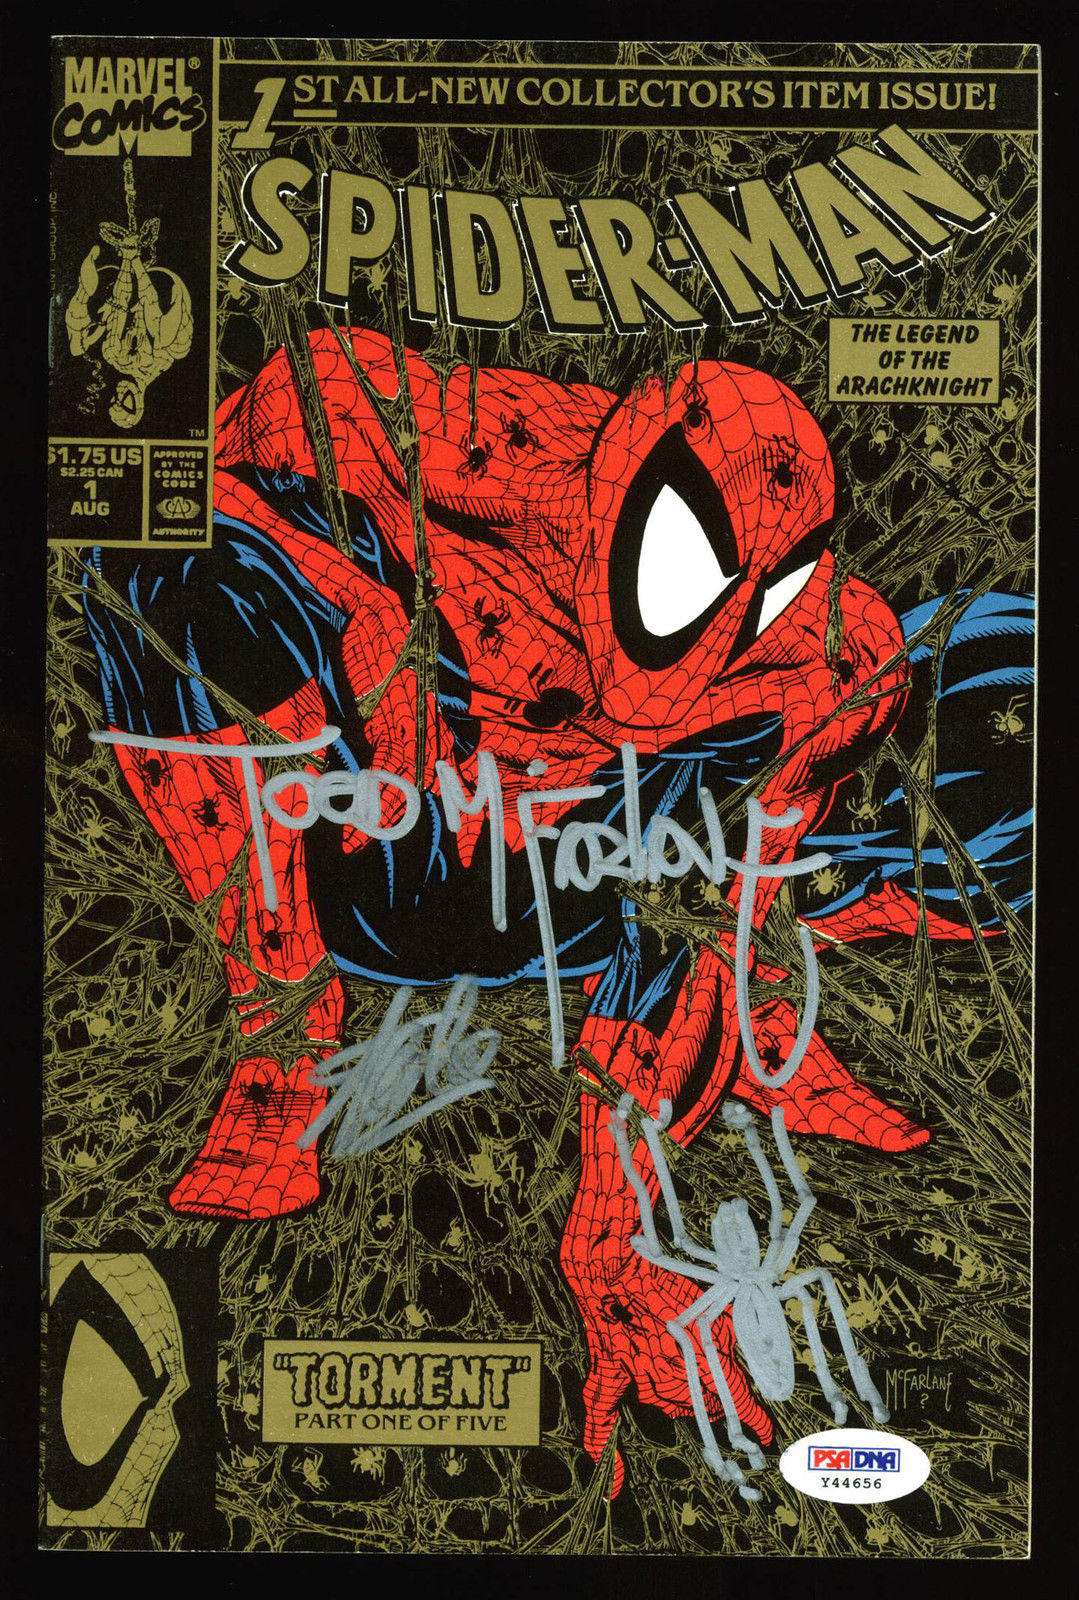 Marvel Spider-man #4 Torment Signed by Stan Lee w//COA Todd McFarlane Cover